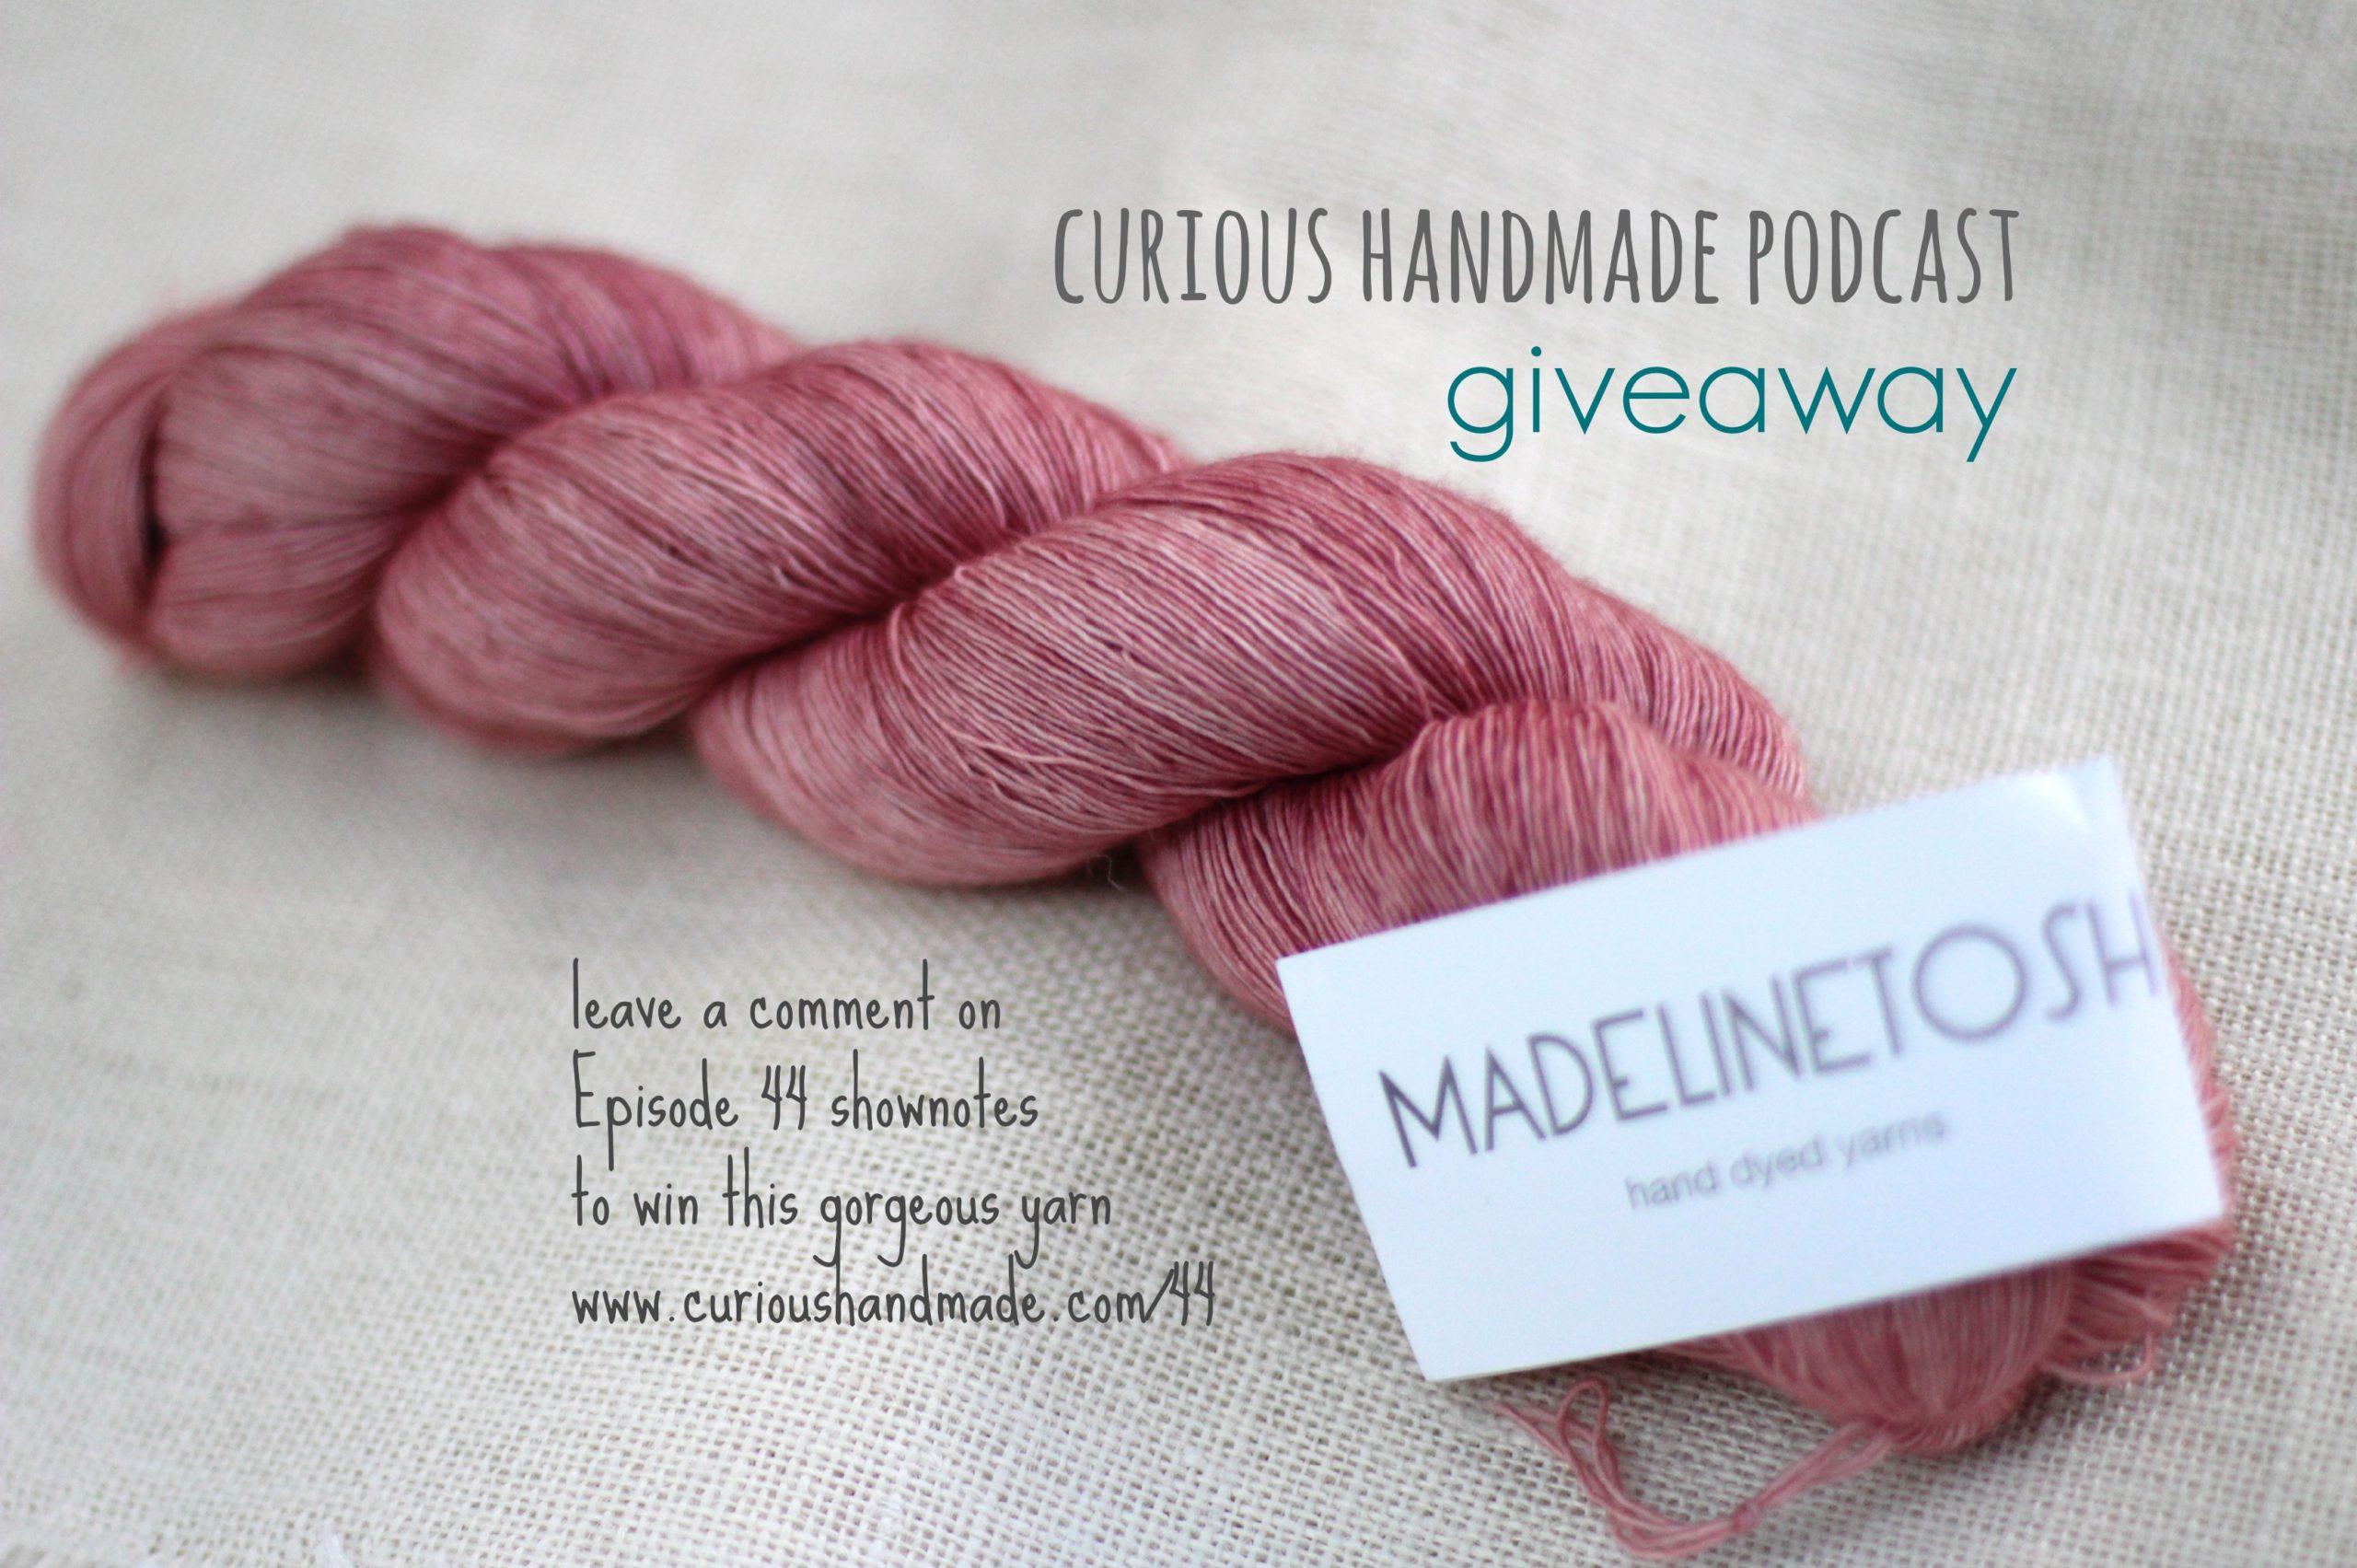 Curious Handmade Podcast giveaway